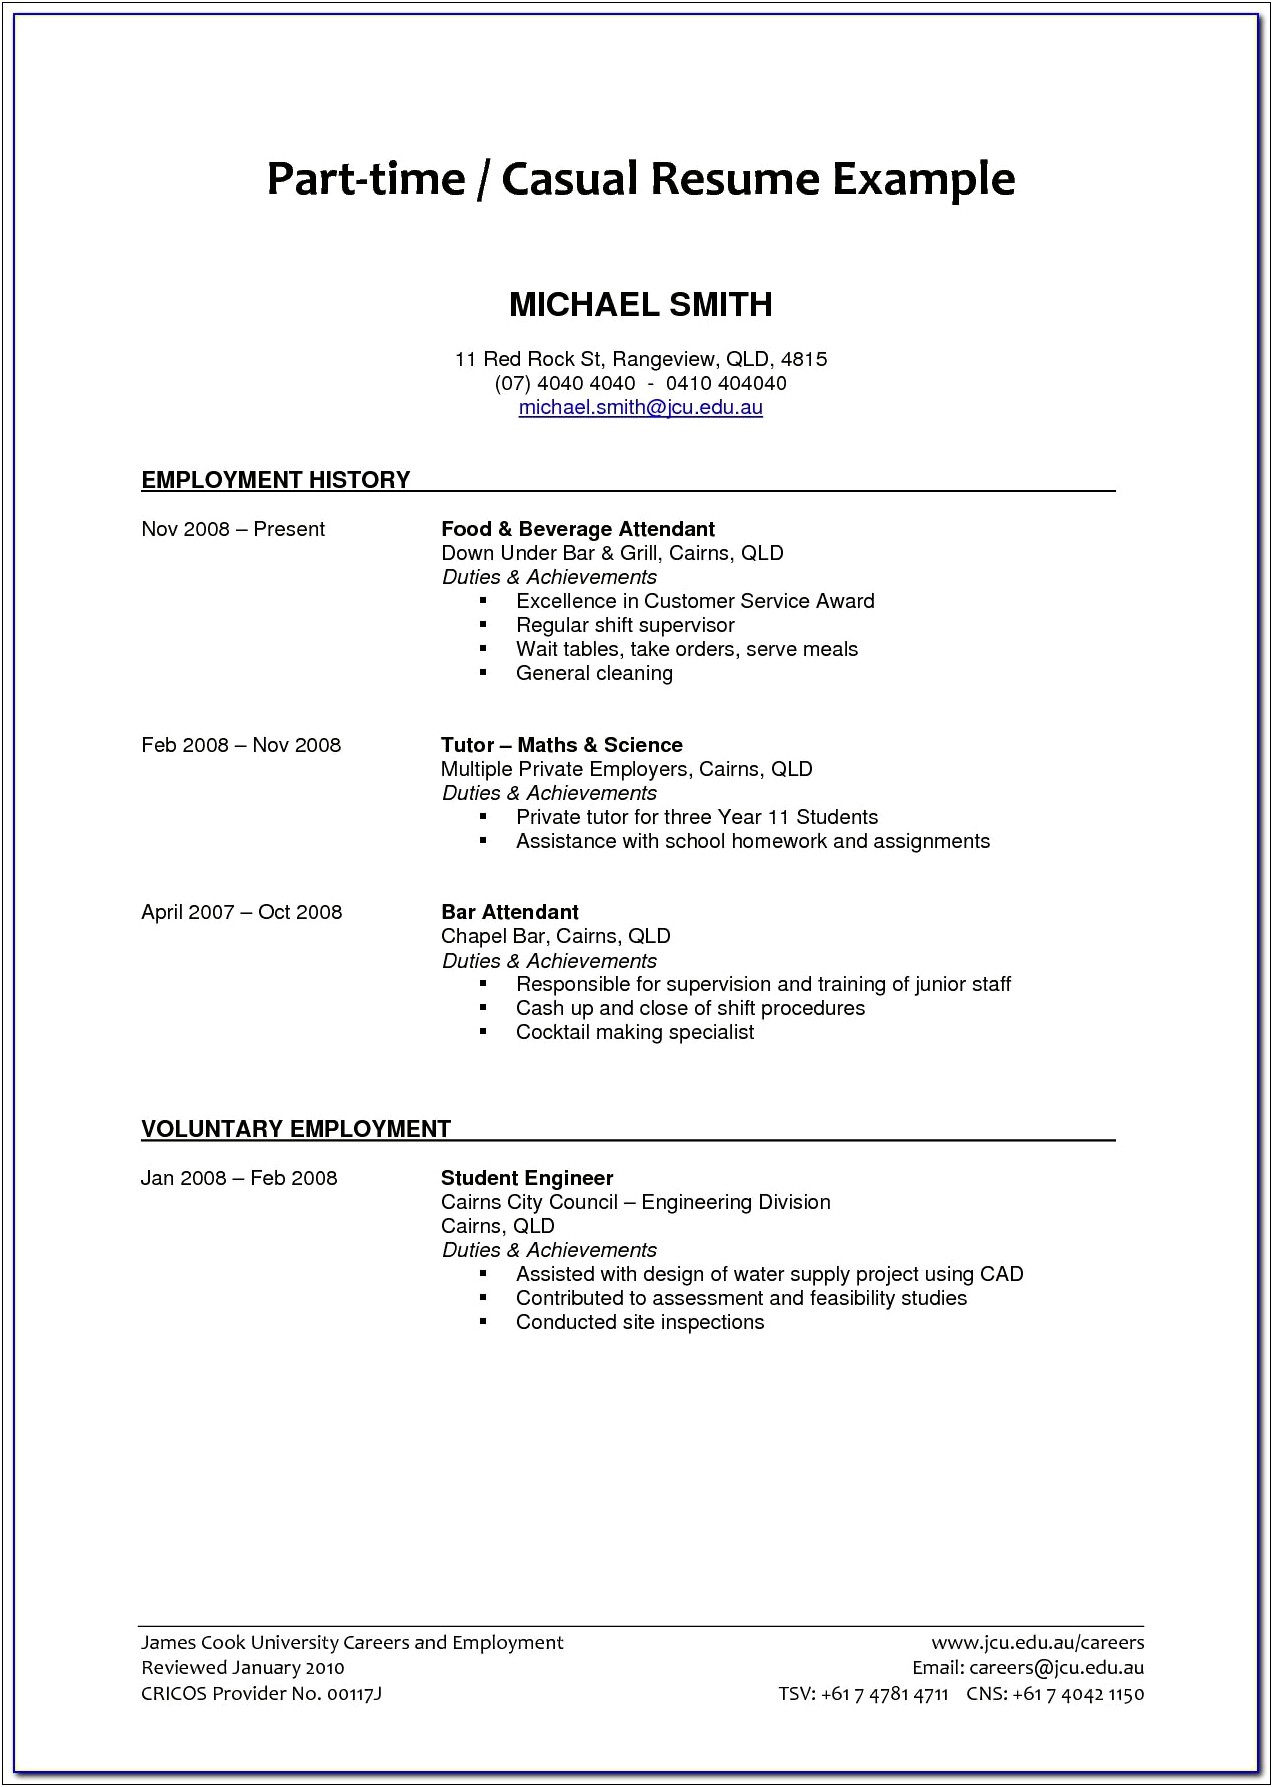 Resume Objectives For Any Position Examples